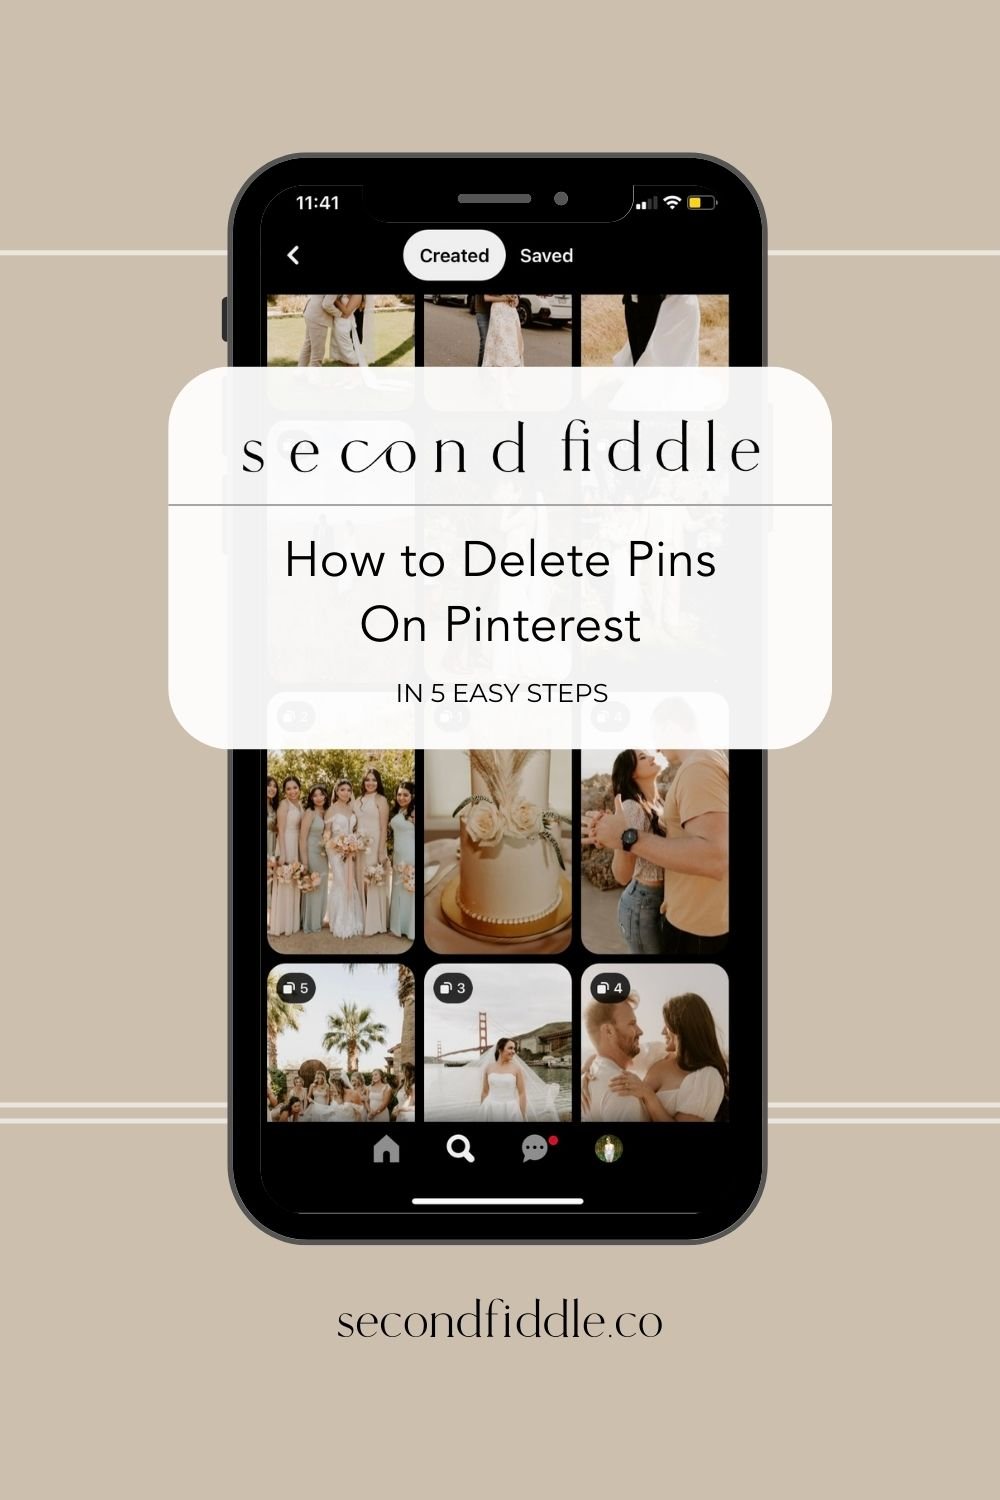 How to Move, Copy & Delete Pinterest Pins in Bulk [Quick Tip]